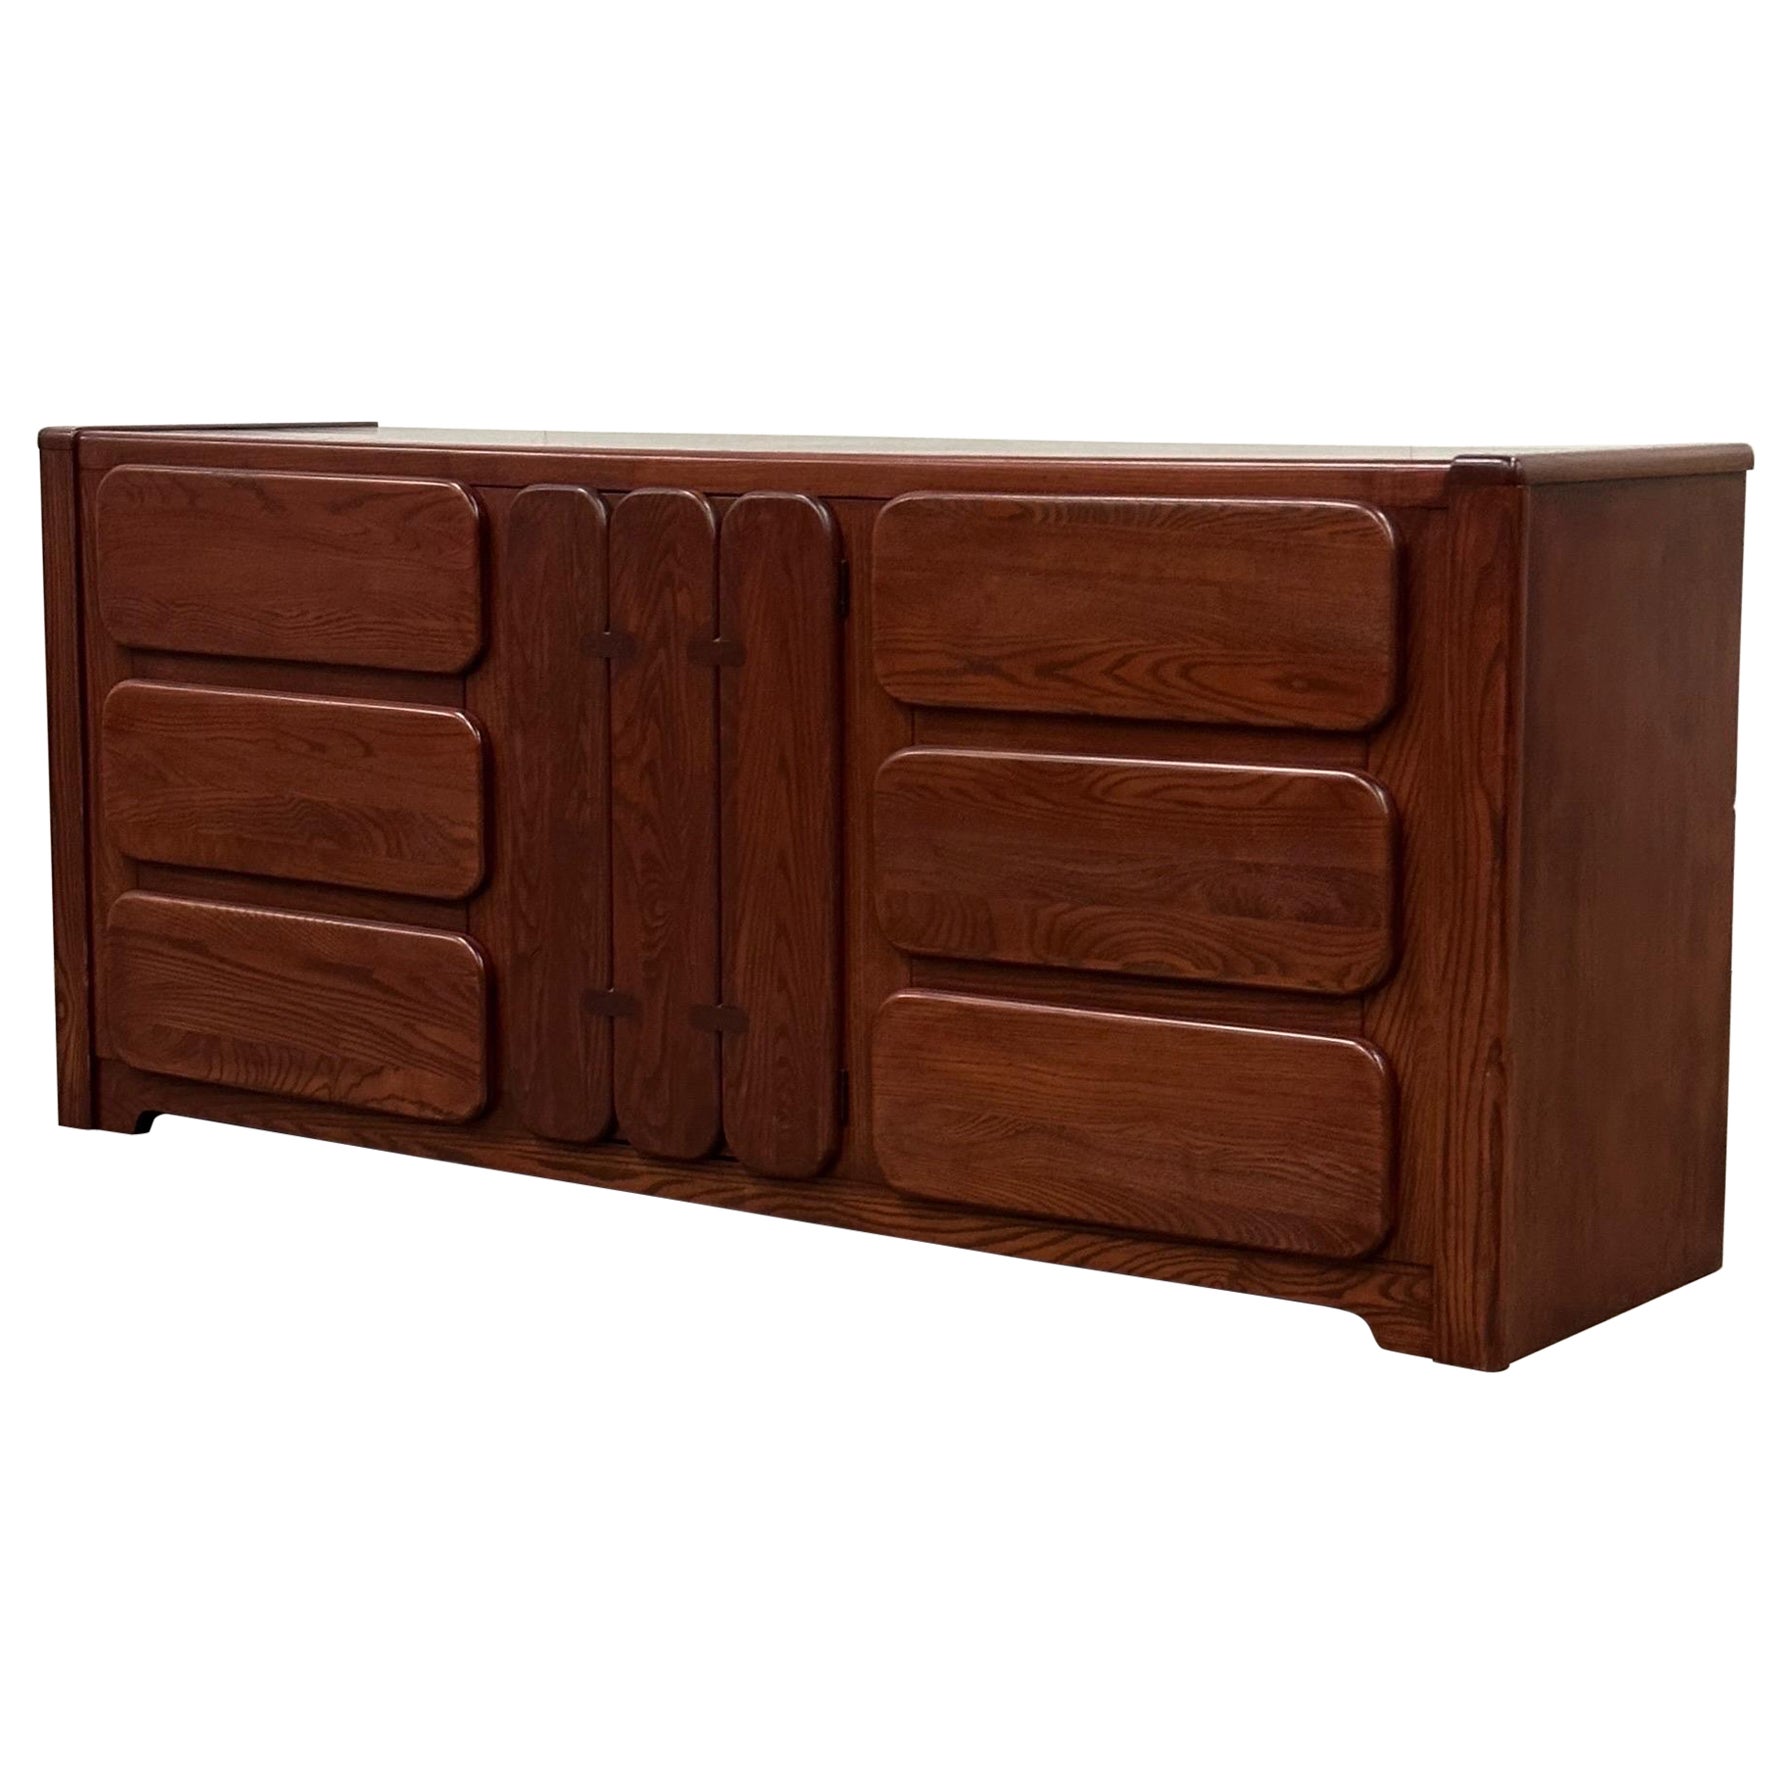 Chunky Moderne Kommode/Sideboard aus Eiche